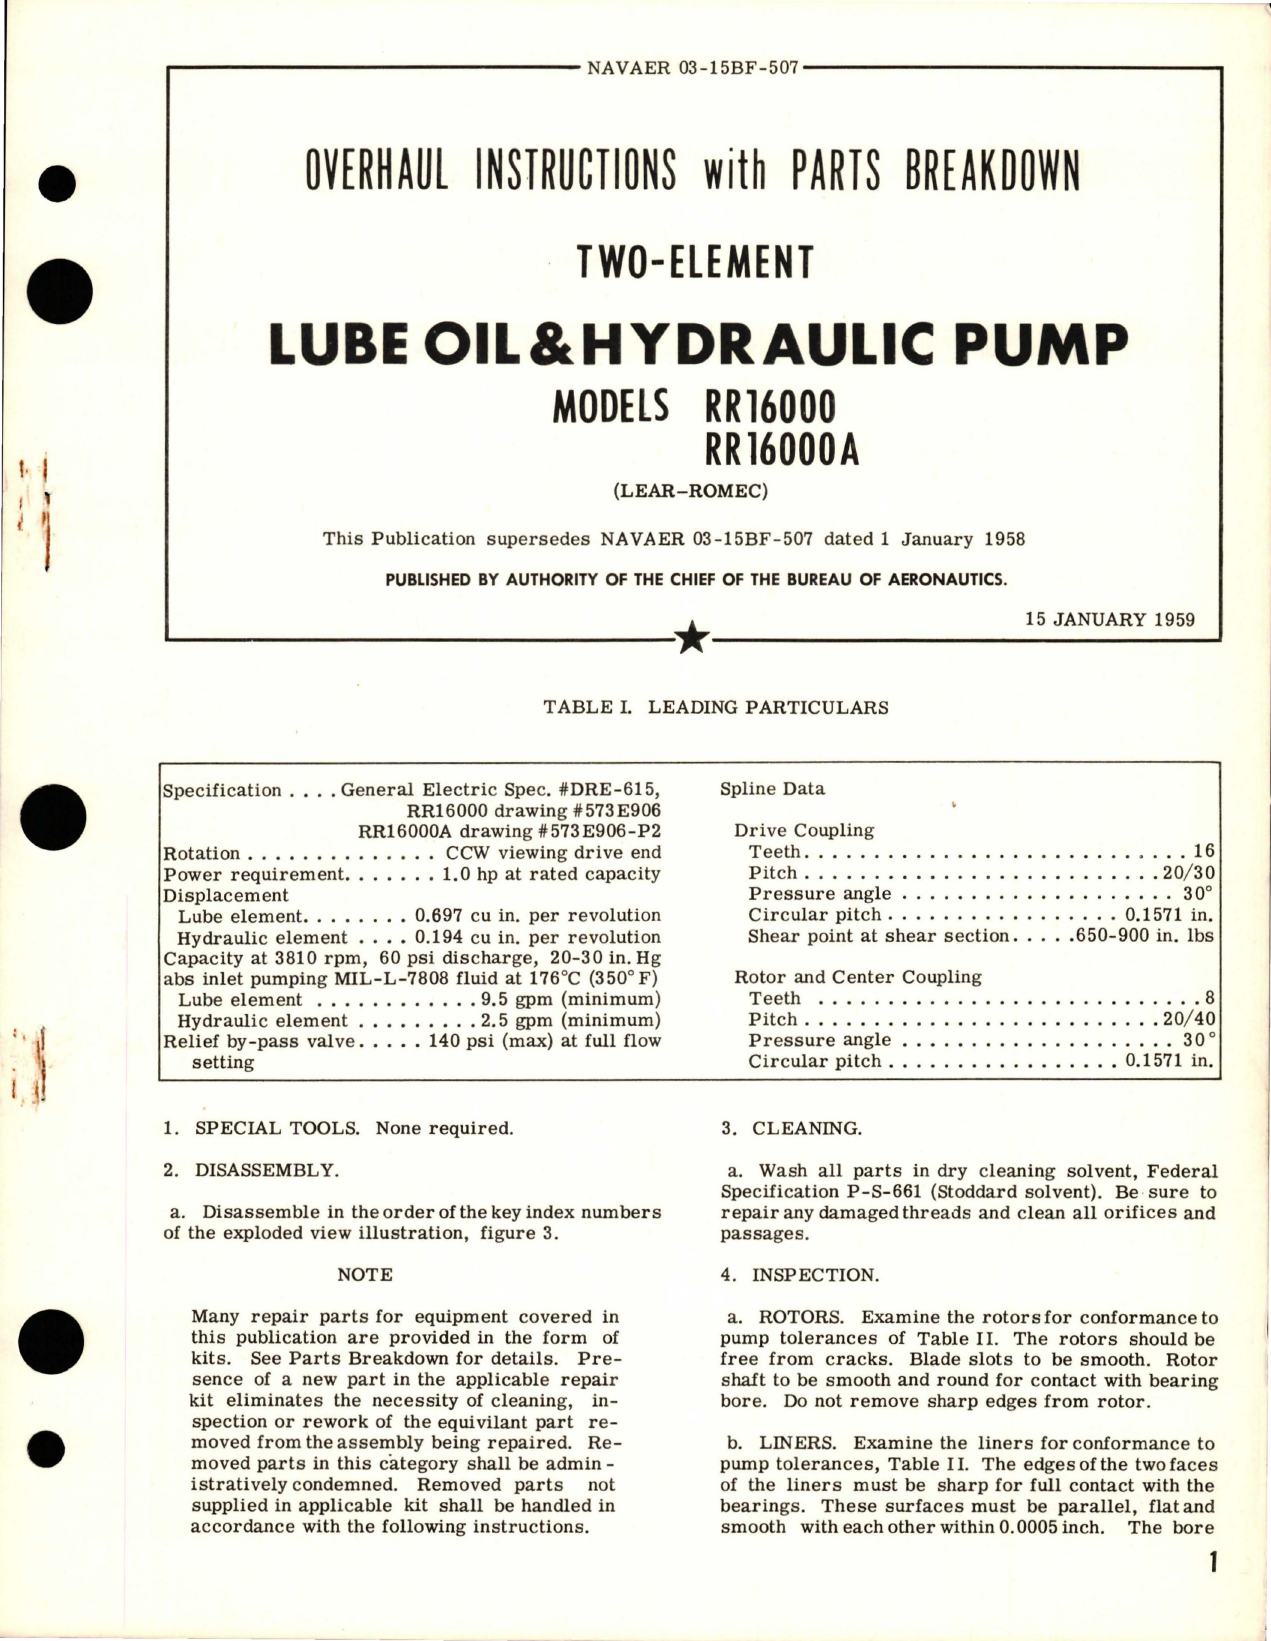 Sample page 1 from AirCorps Library document: Overhaul Instructions with Parts for Two-Element Lube Oil & Hydraulic Pump - Models RR16000 and RR16000A